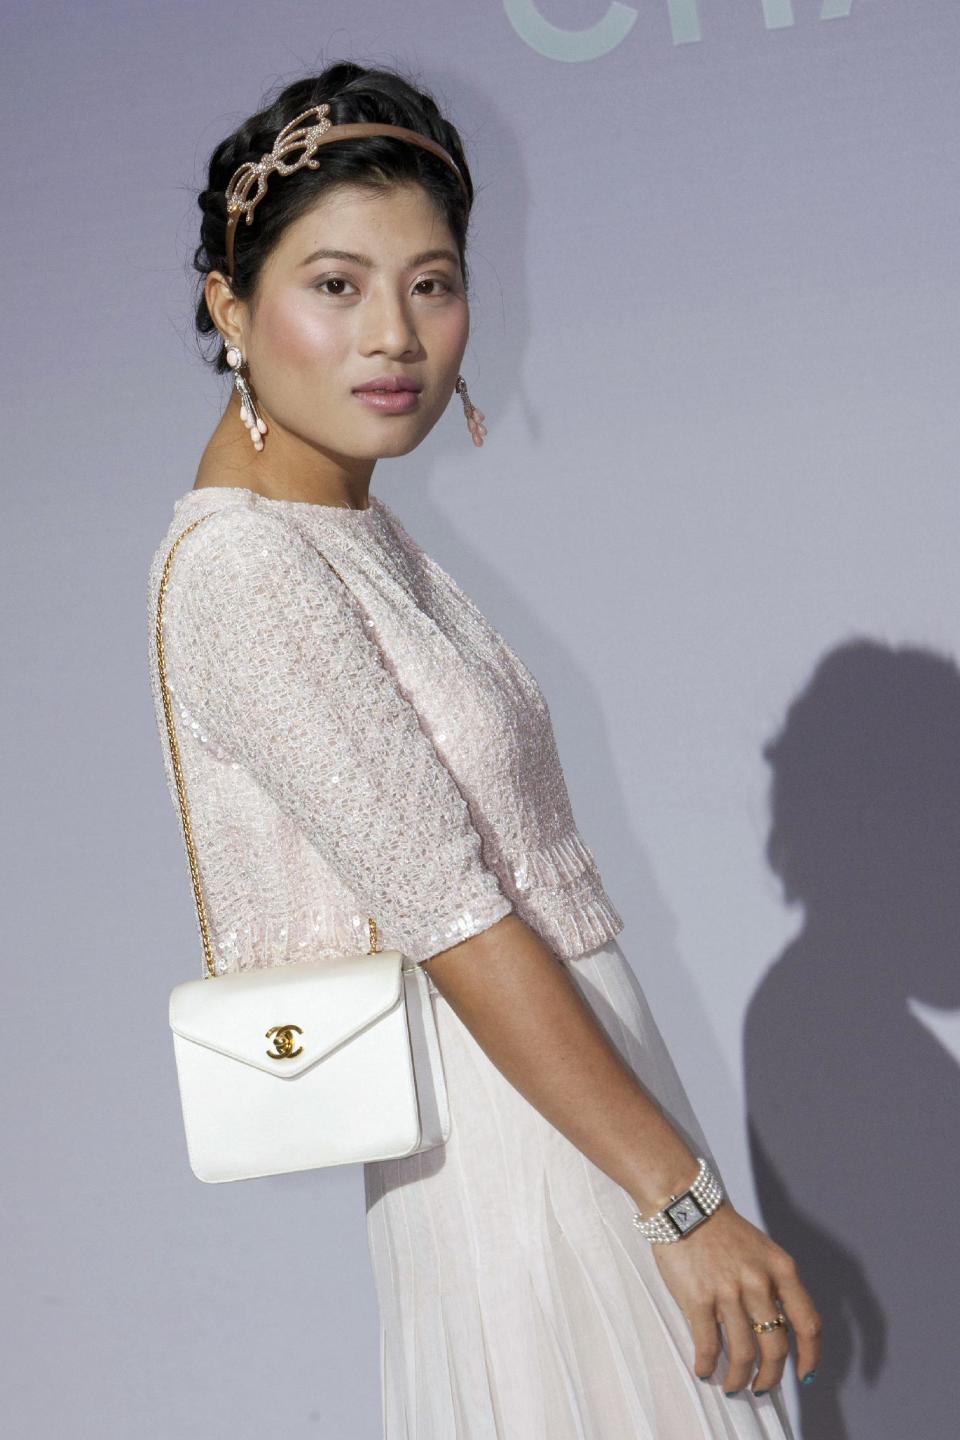 Thailand's Princess Siriwanwaree Nareerat attends Chanel fashion house presentation for Women's Fall-Winter, ready-to-wear 2013 fashion collection, during Paris Fashion week, Tuesday, March 6, 2012. (AP Photo/Thibault Camus)